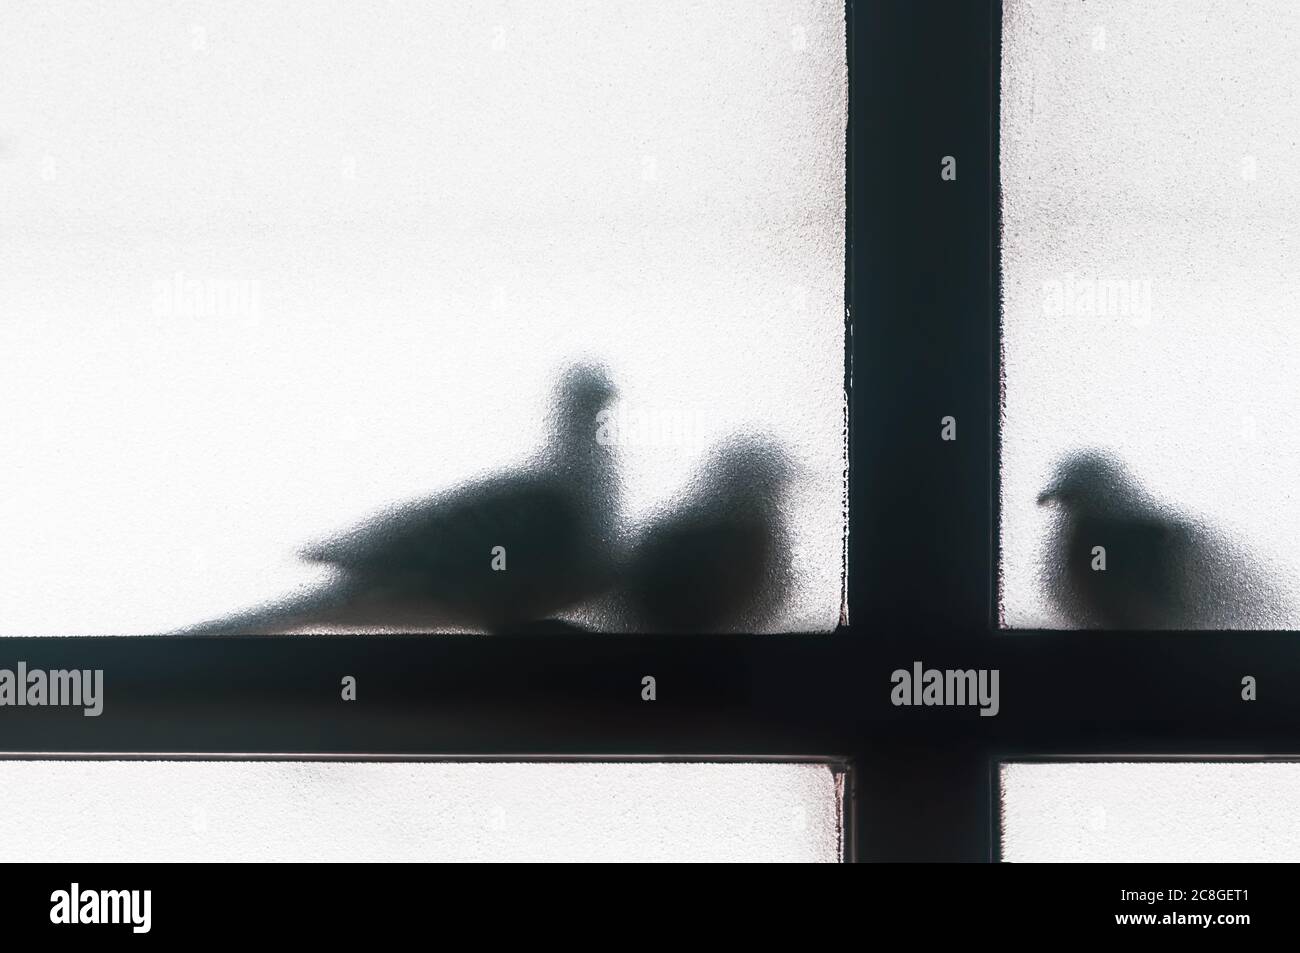 Silhouette of three doves taking shelter outside a glass window, shadow of birds sitting on windowsill Stock Photo